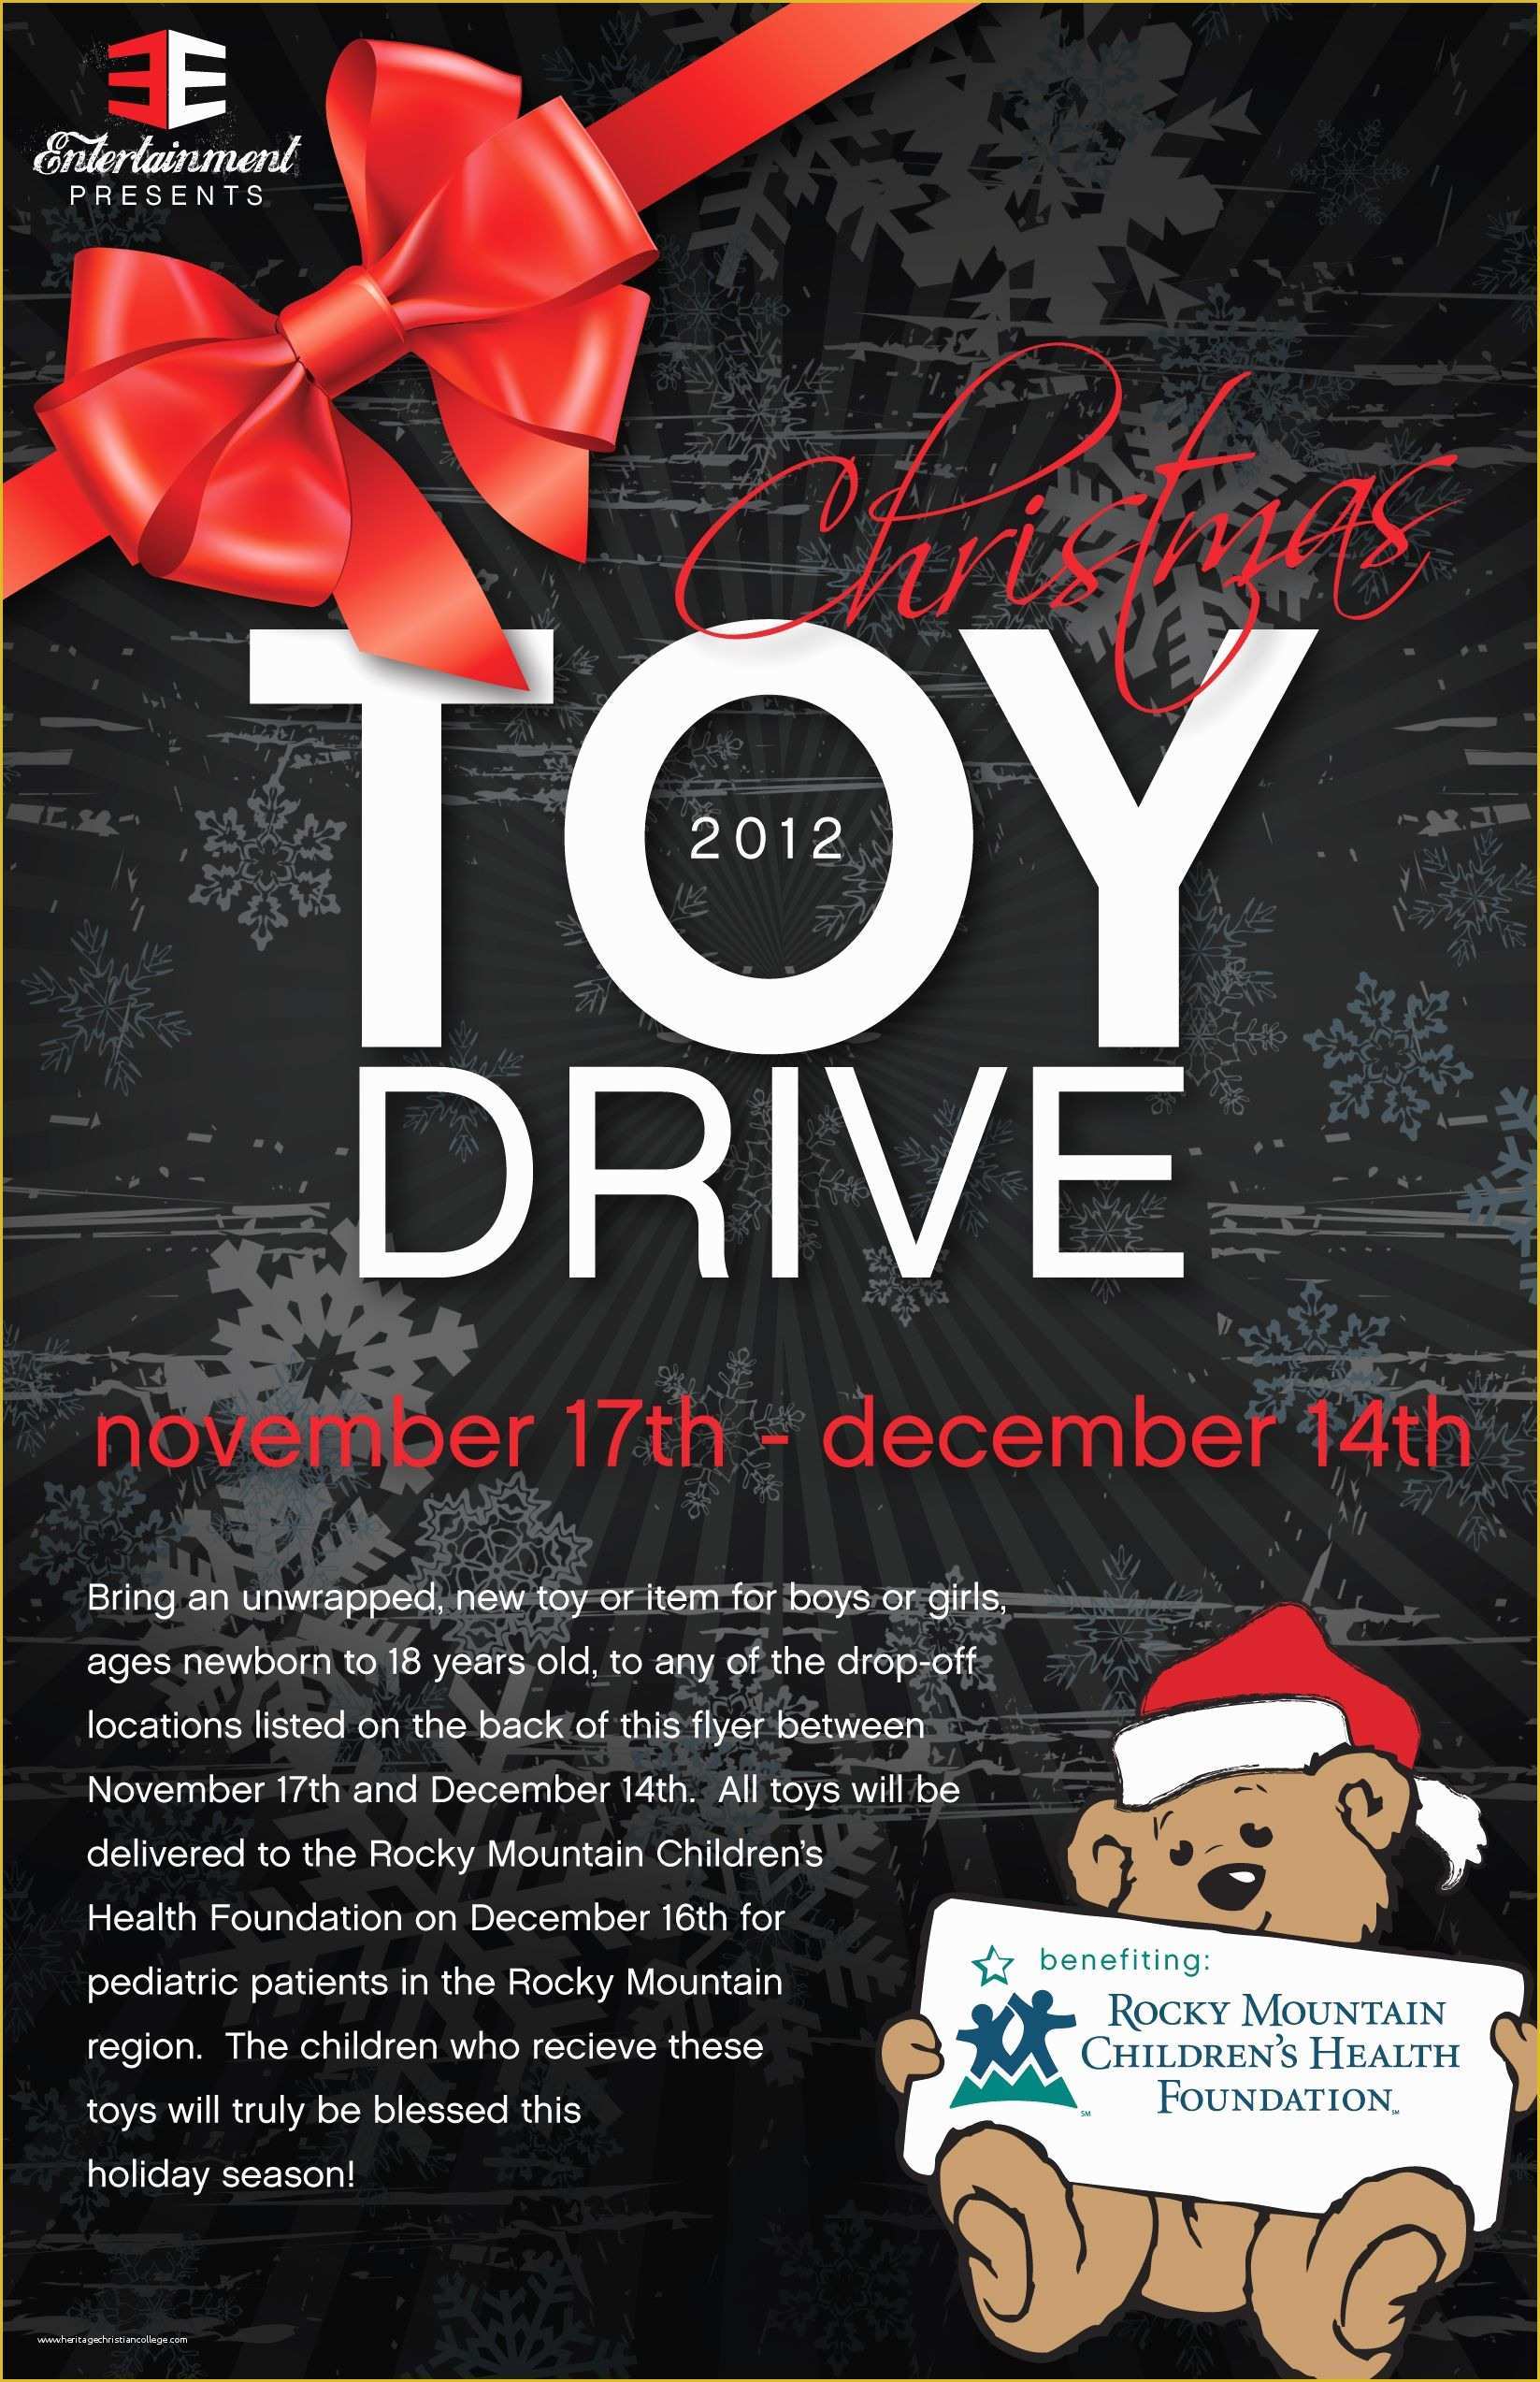 Holiday toy Drive Flyer Template Free Of toy Drive Flyer Google Search